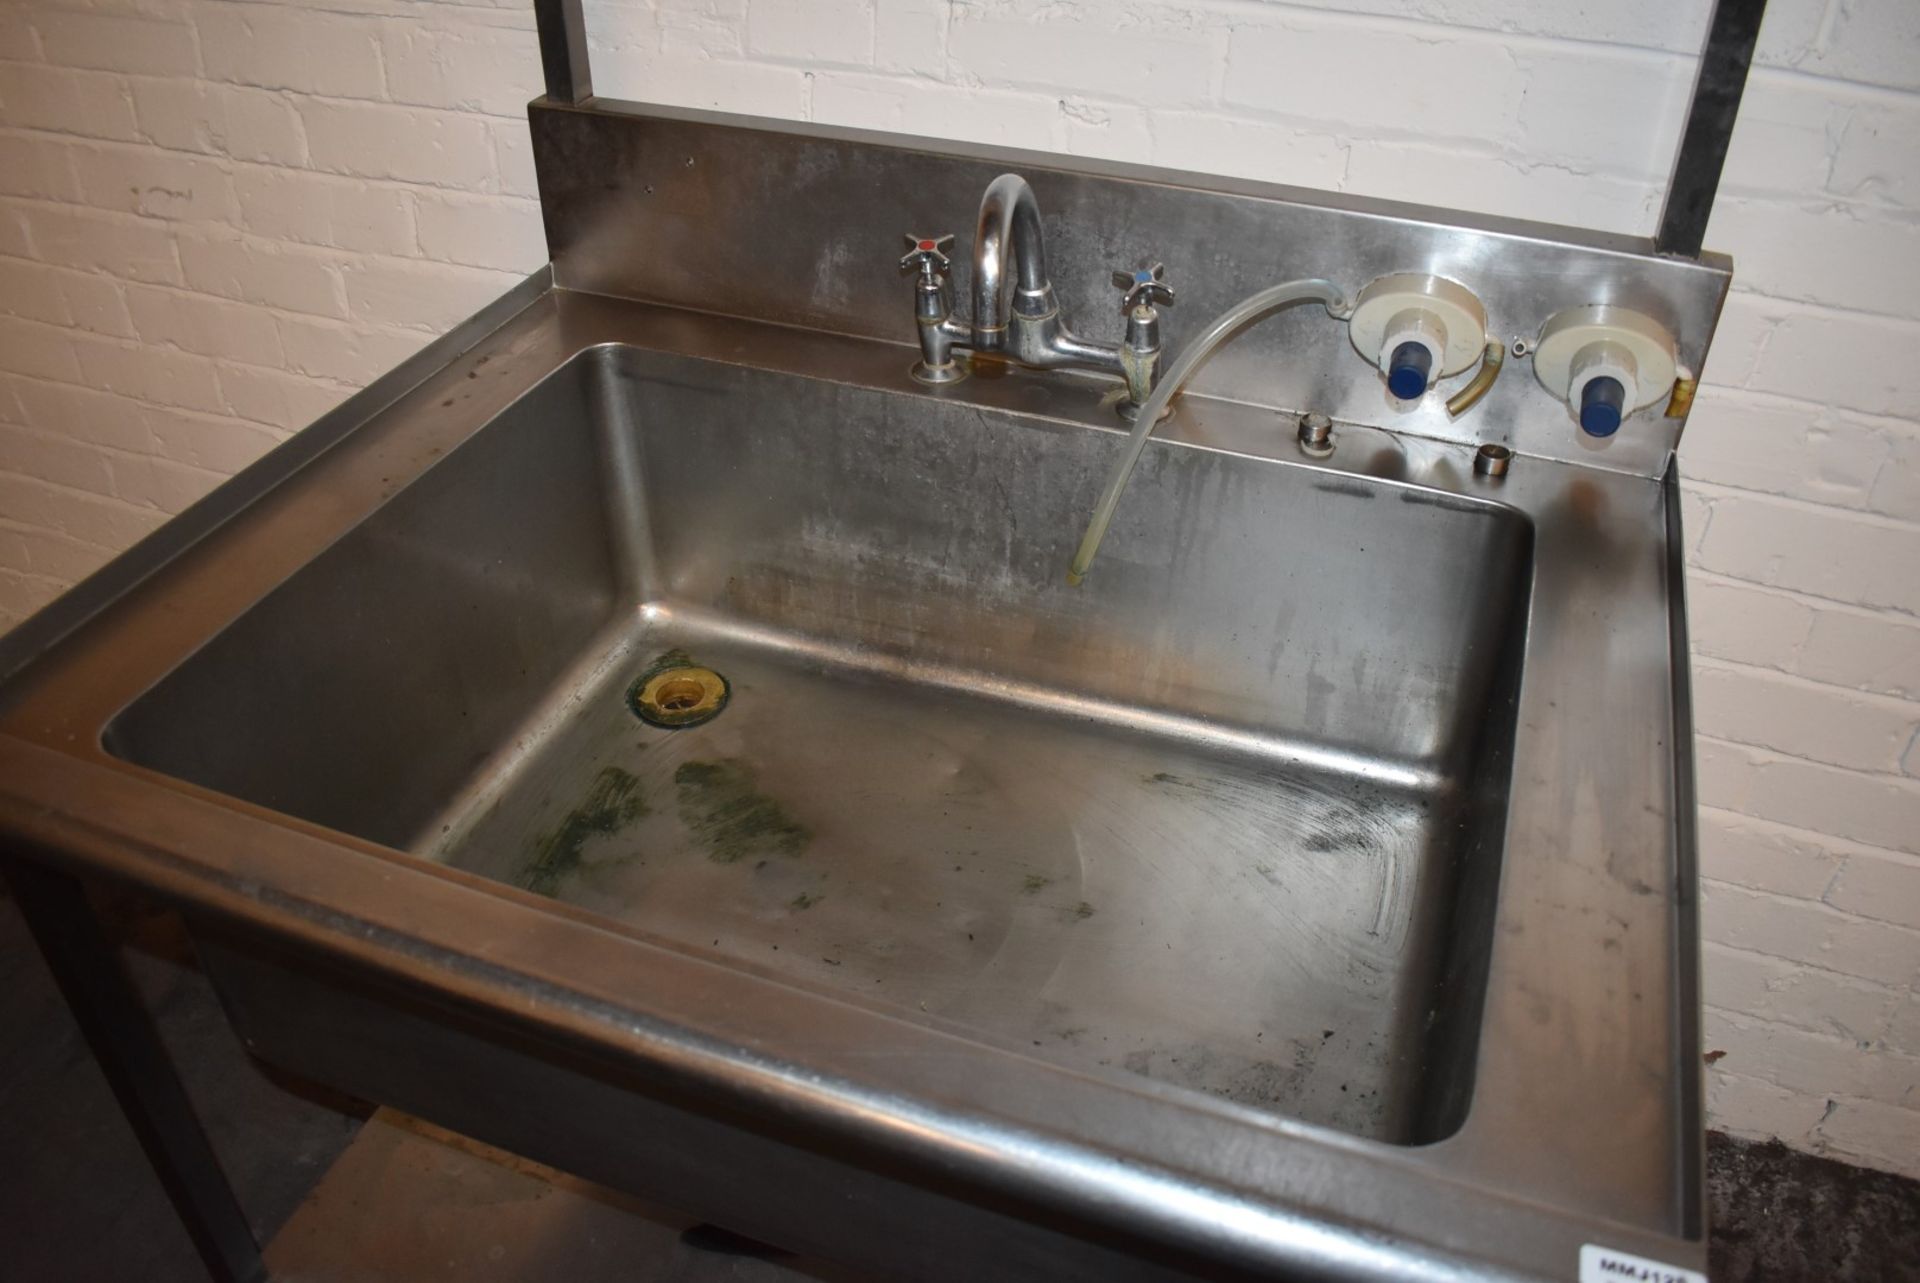 1 x Stainless Steel Sink Unit Featuring a Large 80x60cm Wash Bowl, Mixer Taps, Soap Dispensers, - Image 8 of 11